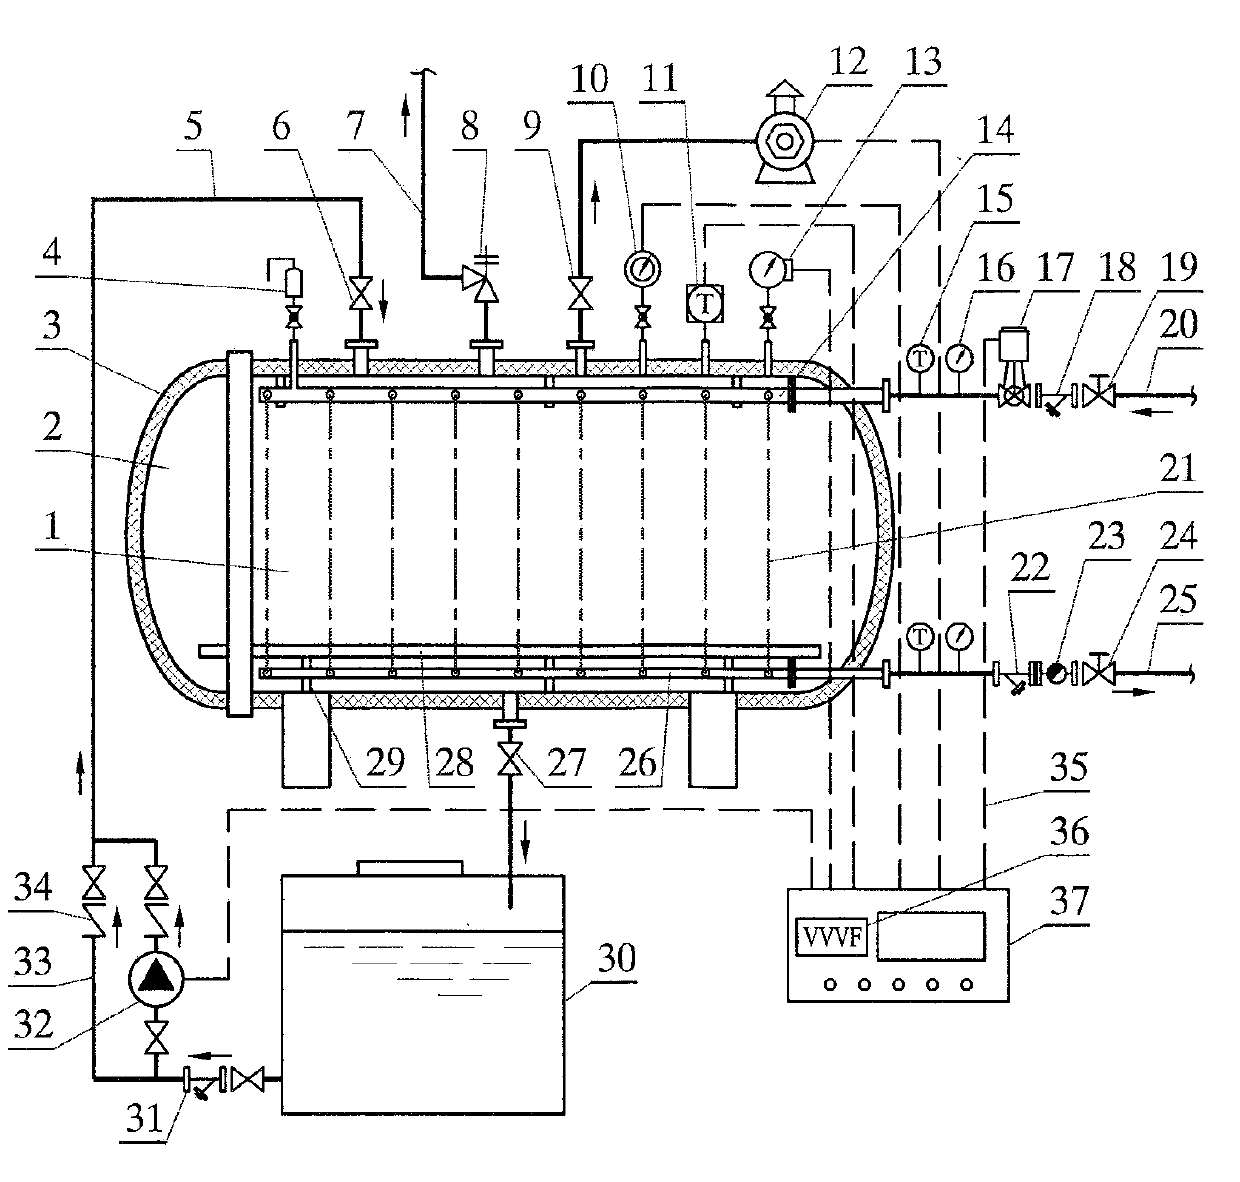 Wood dipping heat treatment pressurization device